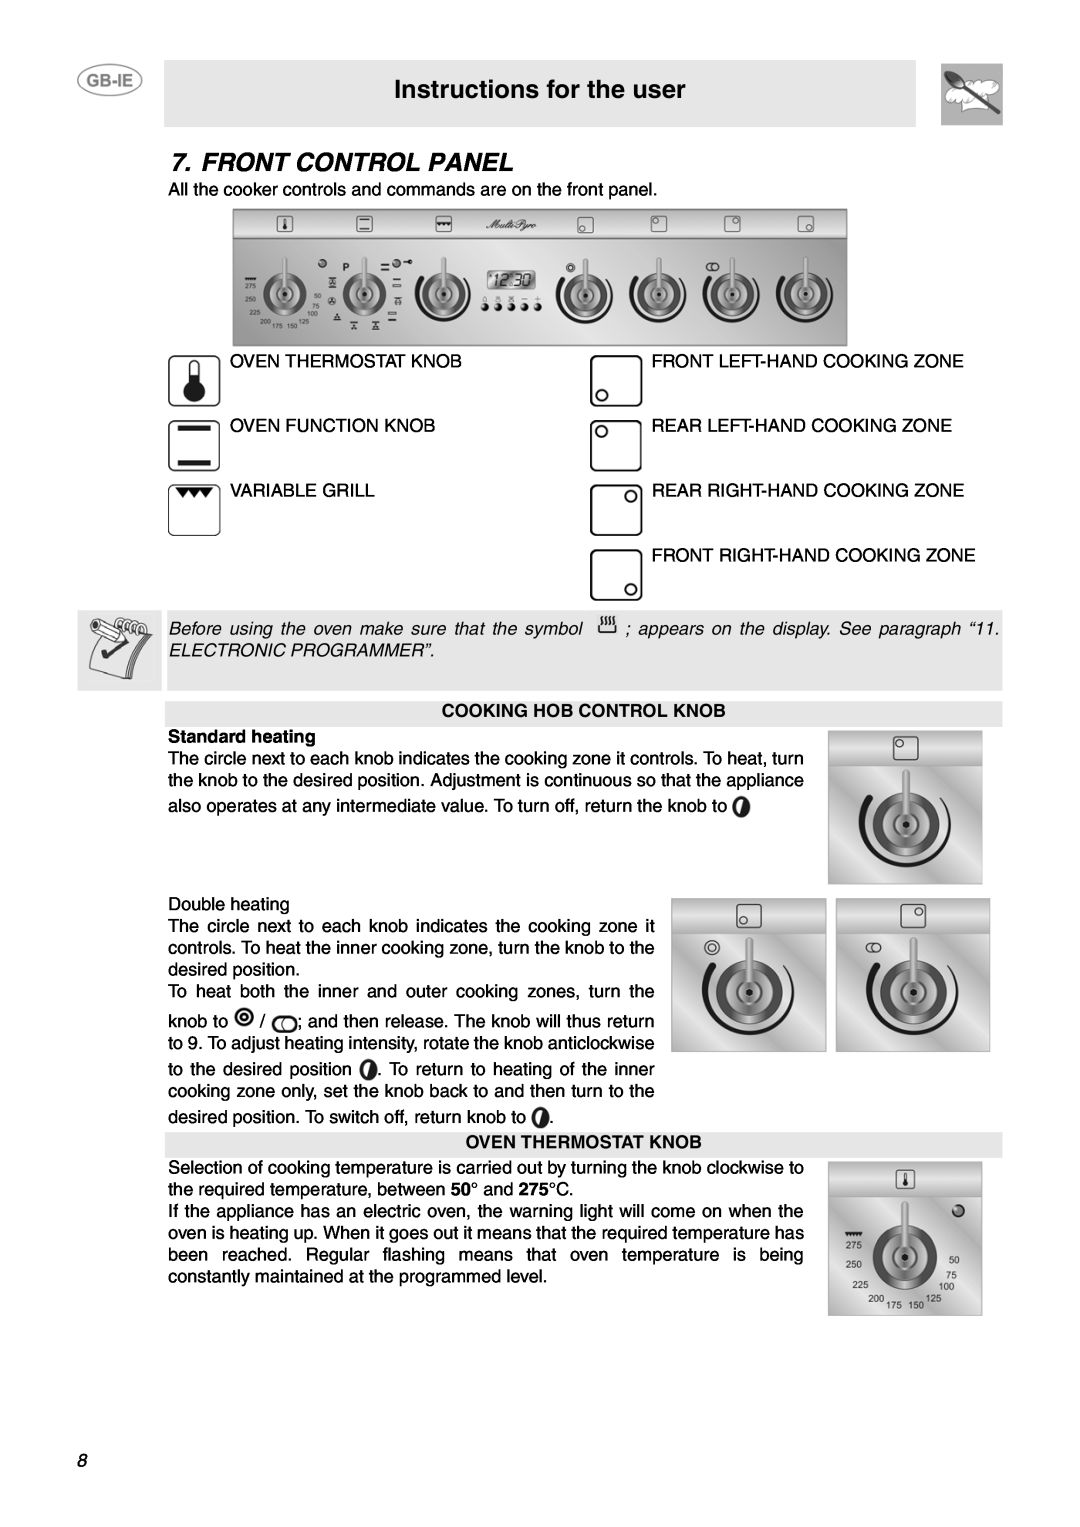 Smeg SUK61CPX5 manual Front Control Panel, Instructions for the user, COOKING HOB CONTROL KNOB Standard heating 